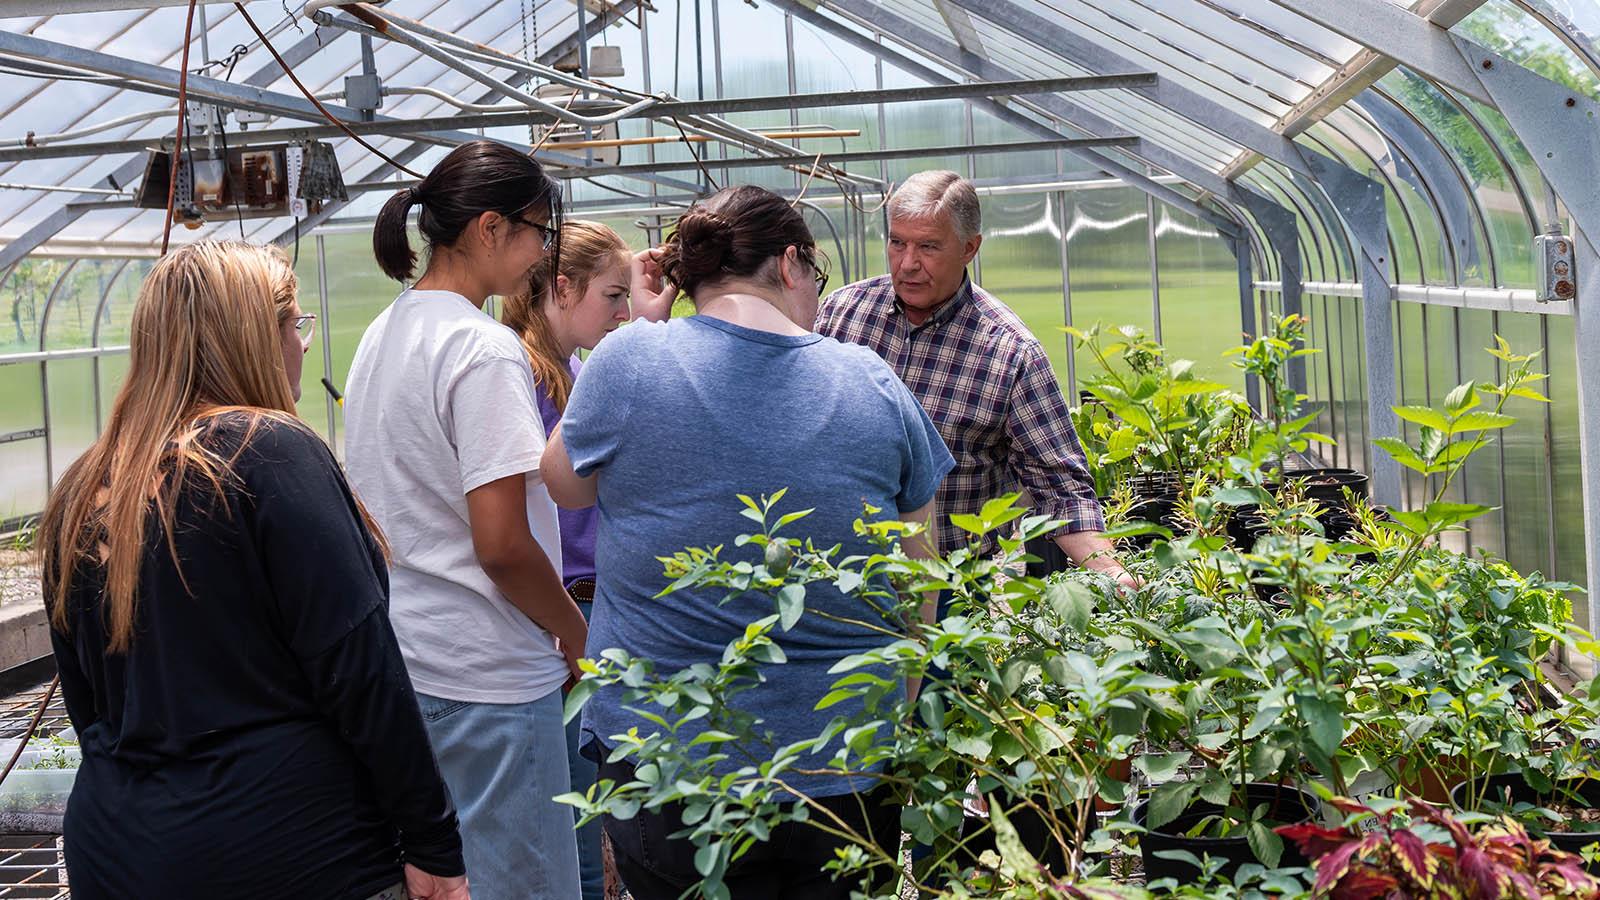 Agriculture students learning with teacher in greenhouse